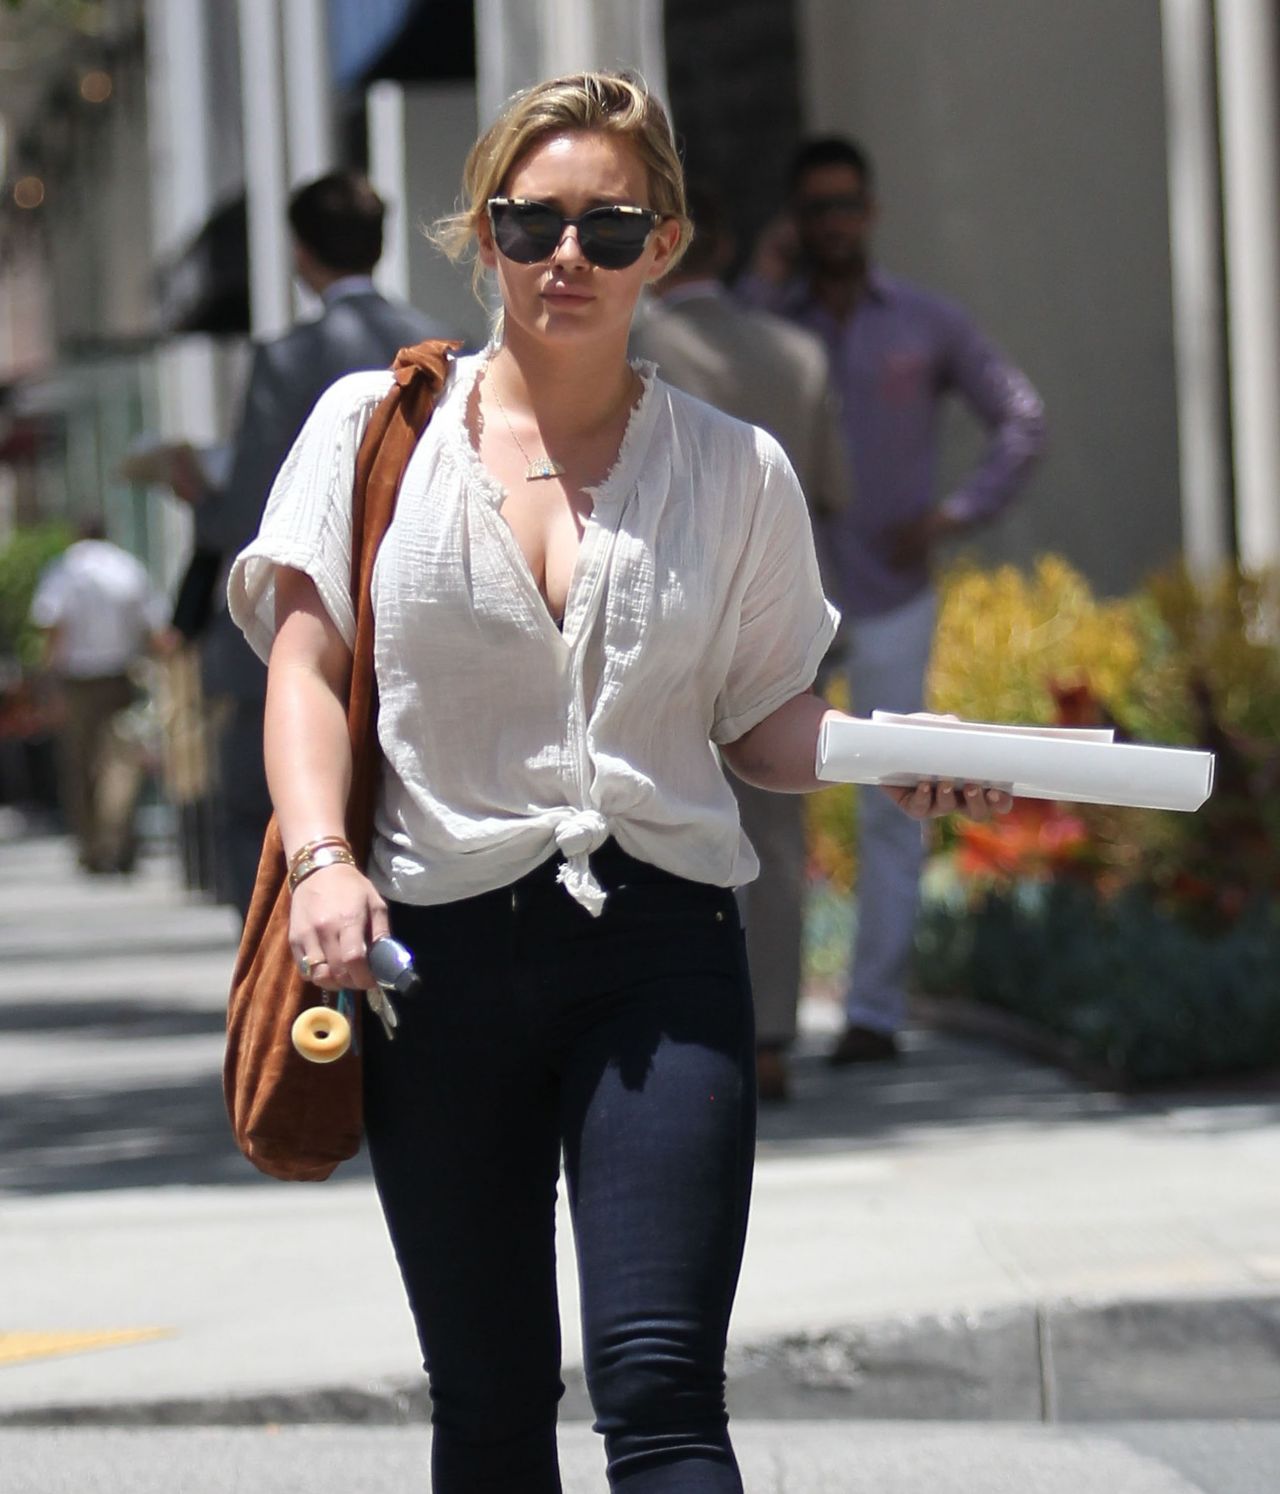 Hilary Duff Los Angeles October 28, 2016 – Star Style